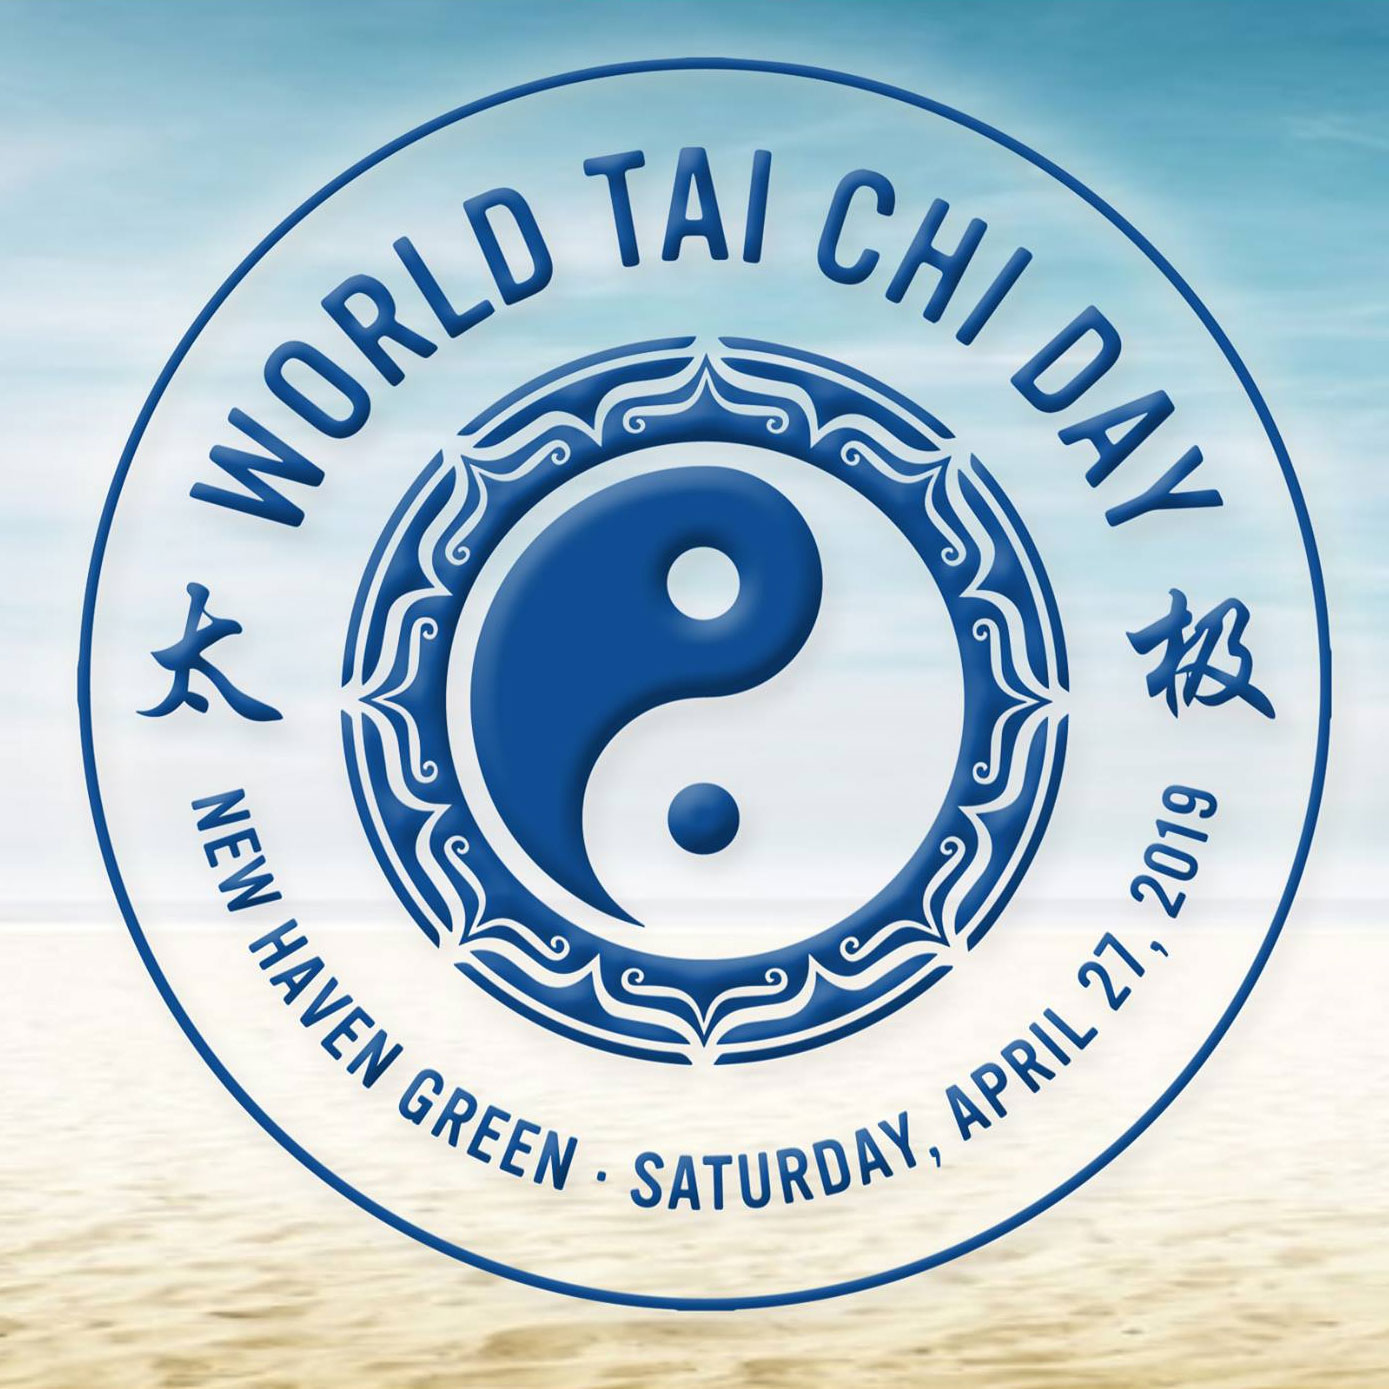 World Tai Chi Day Symposium (Linsly-Chittenden Hall)